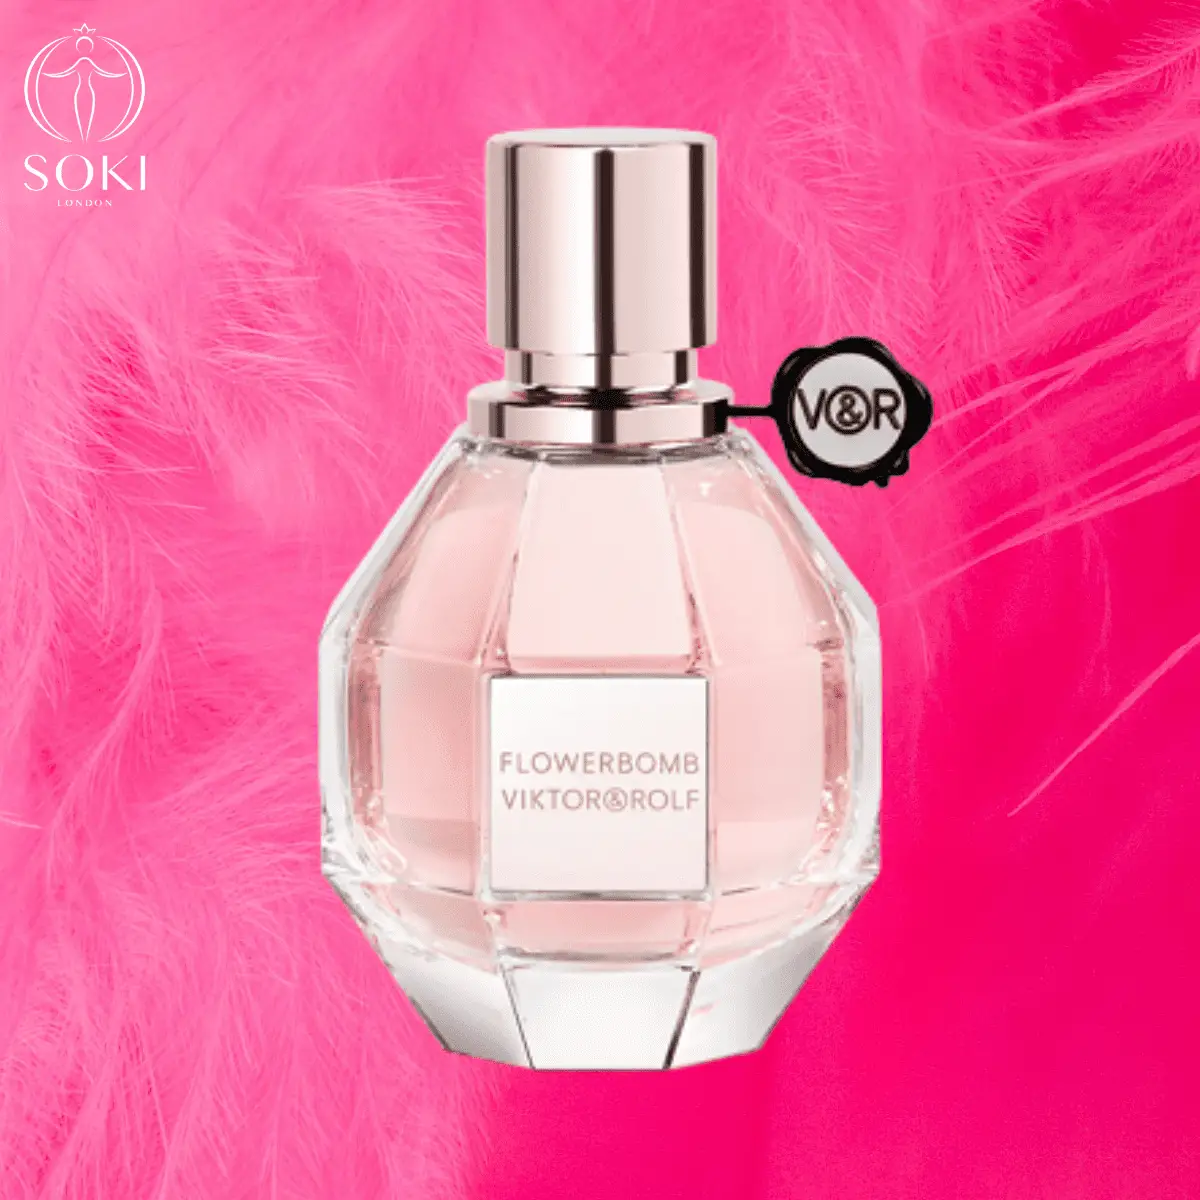 Viktor-and-Rolf-Flowerbomb-Perfume
The Top Ten Best Selling Perfumes In The World